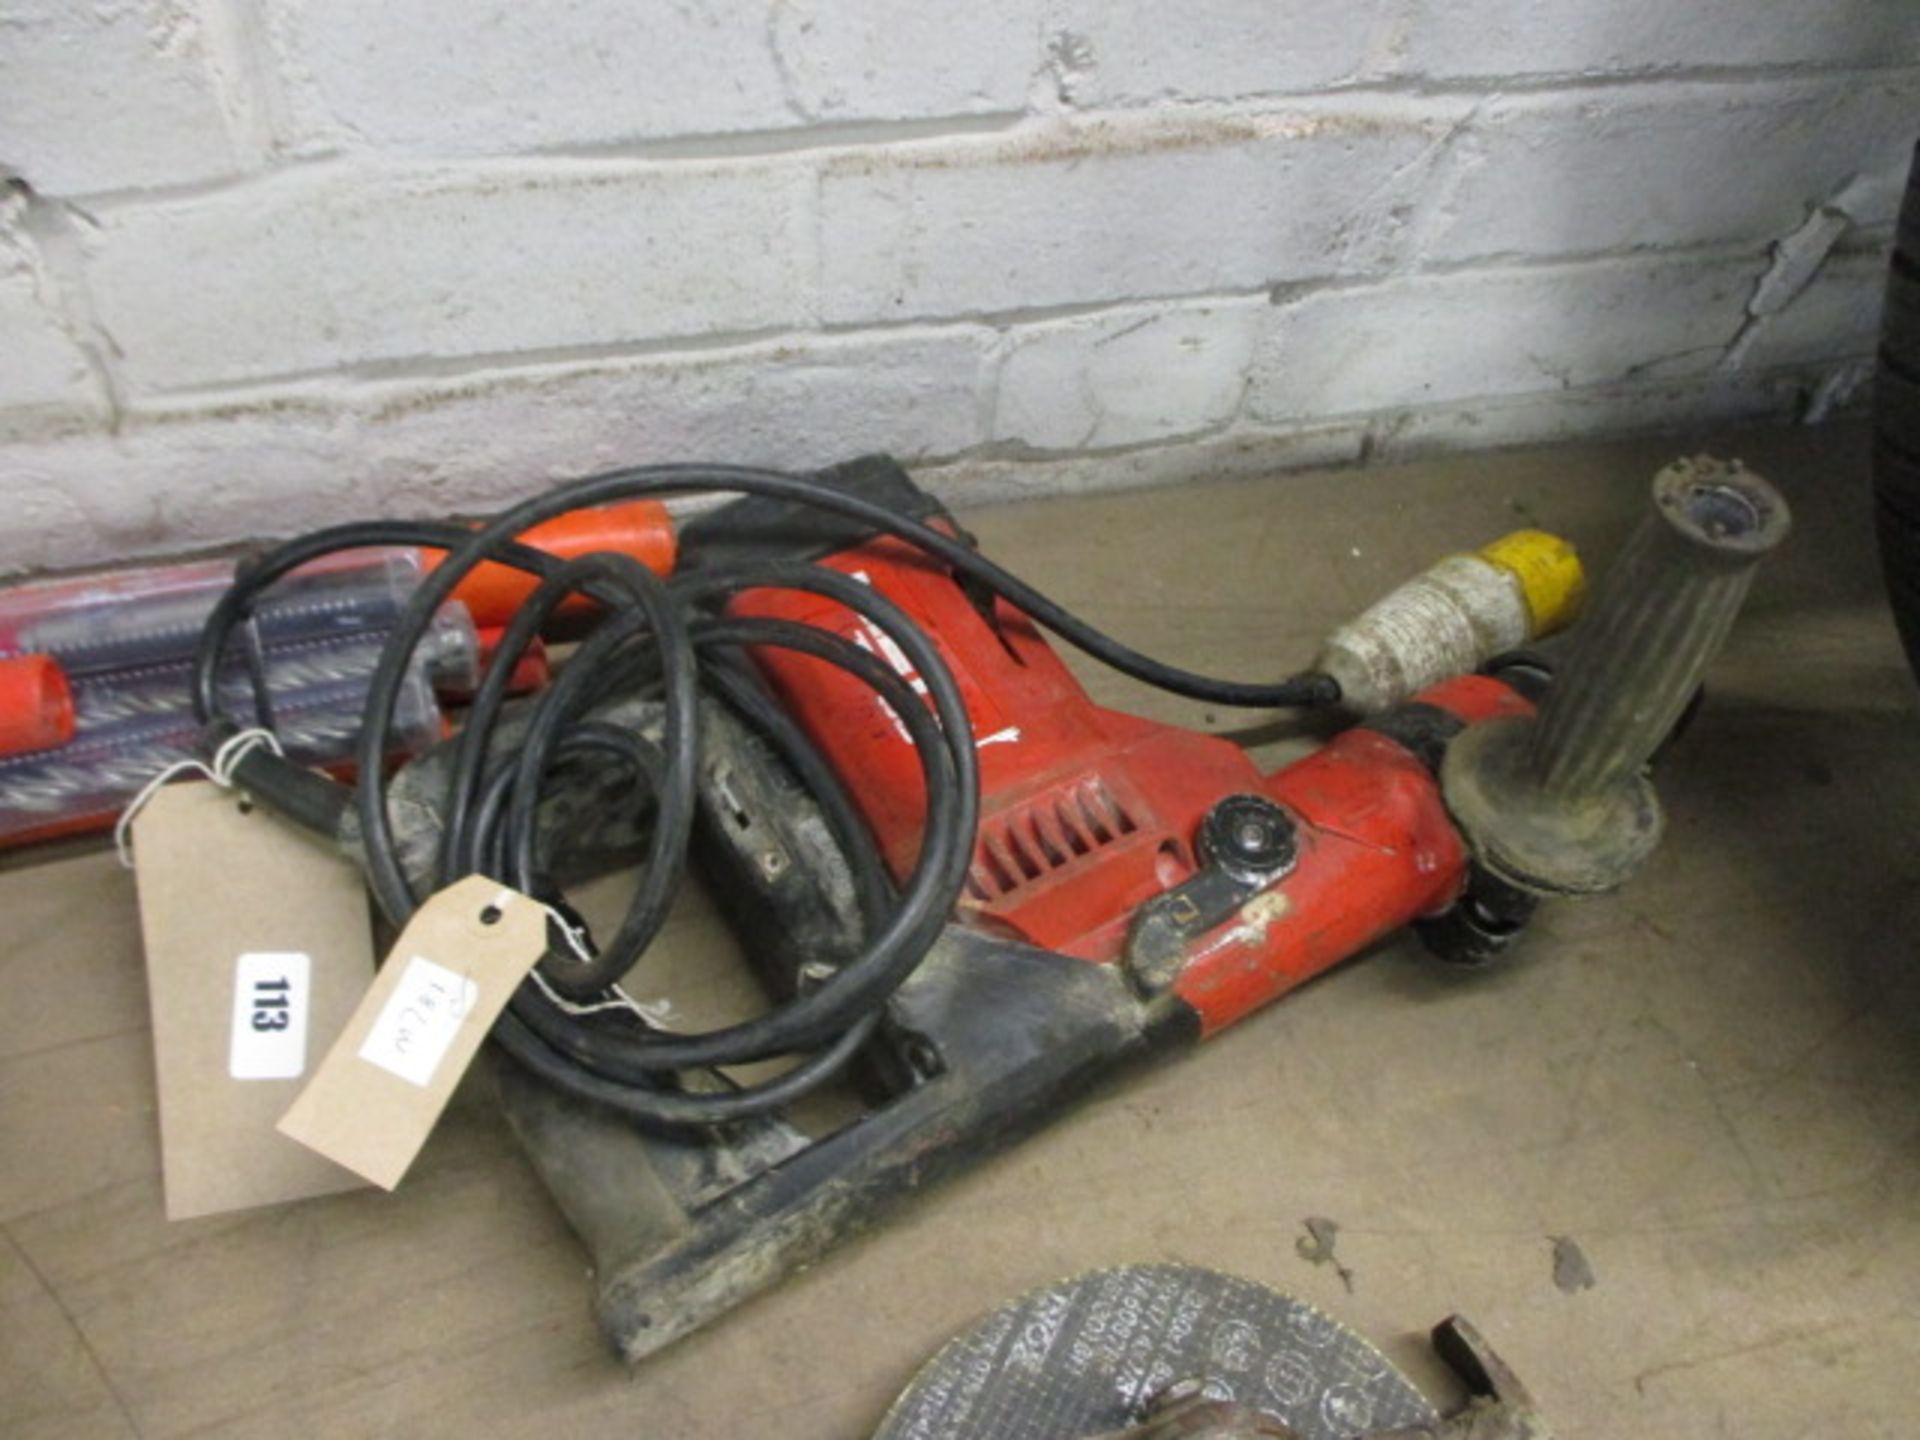 (38) Hilti TE55 SDS breaker hammer drill with assorted tooling